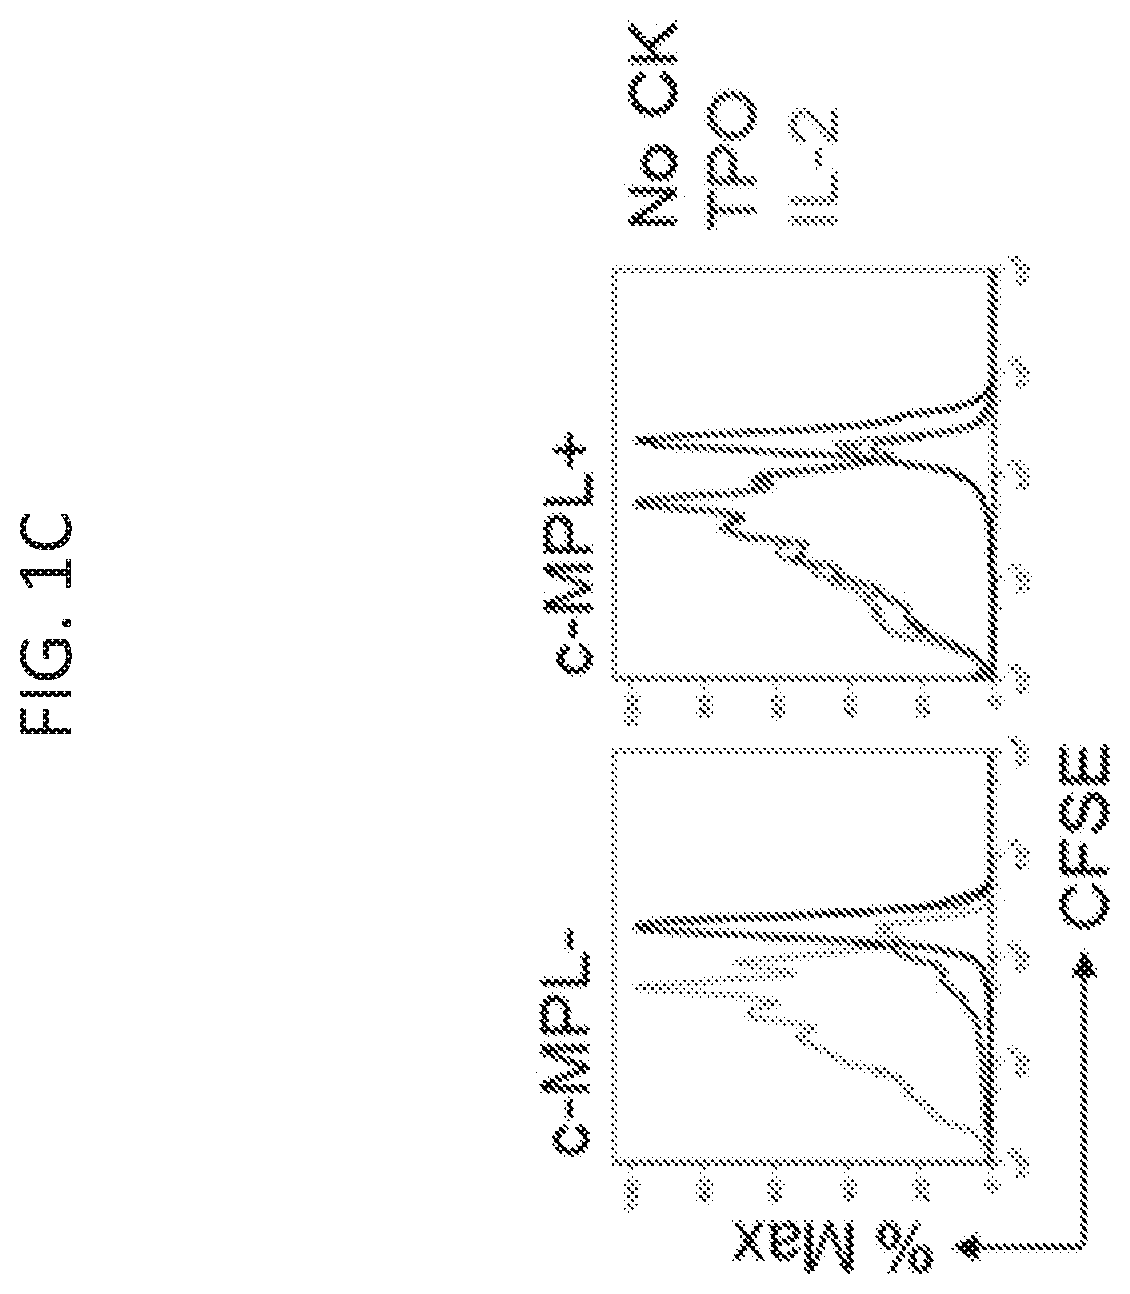 TRANSGENIC c-MPL PROVIDES LIGAND-DEPENDENT CO-STIMULATION AND CYTOKINE SIGNALS TO TCR-ENGINEERED T CELLS